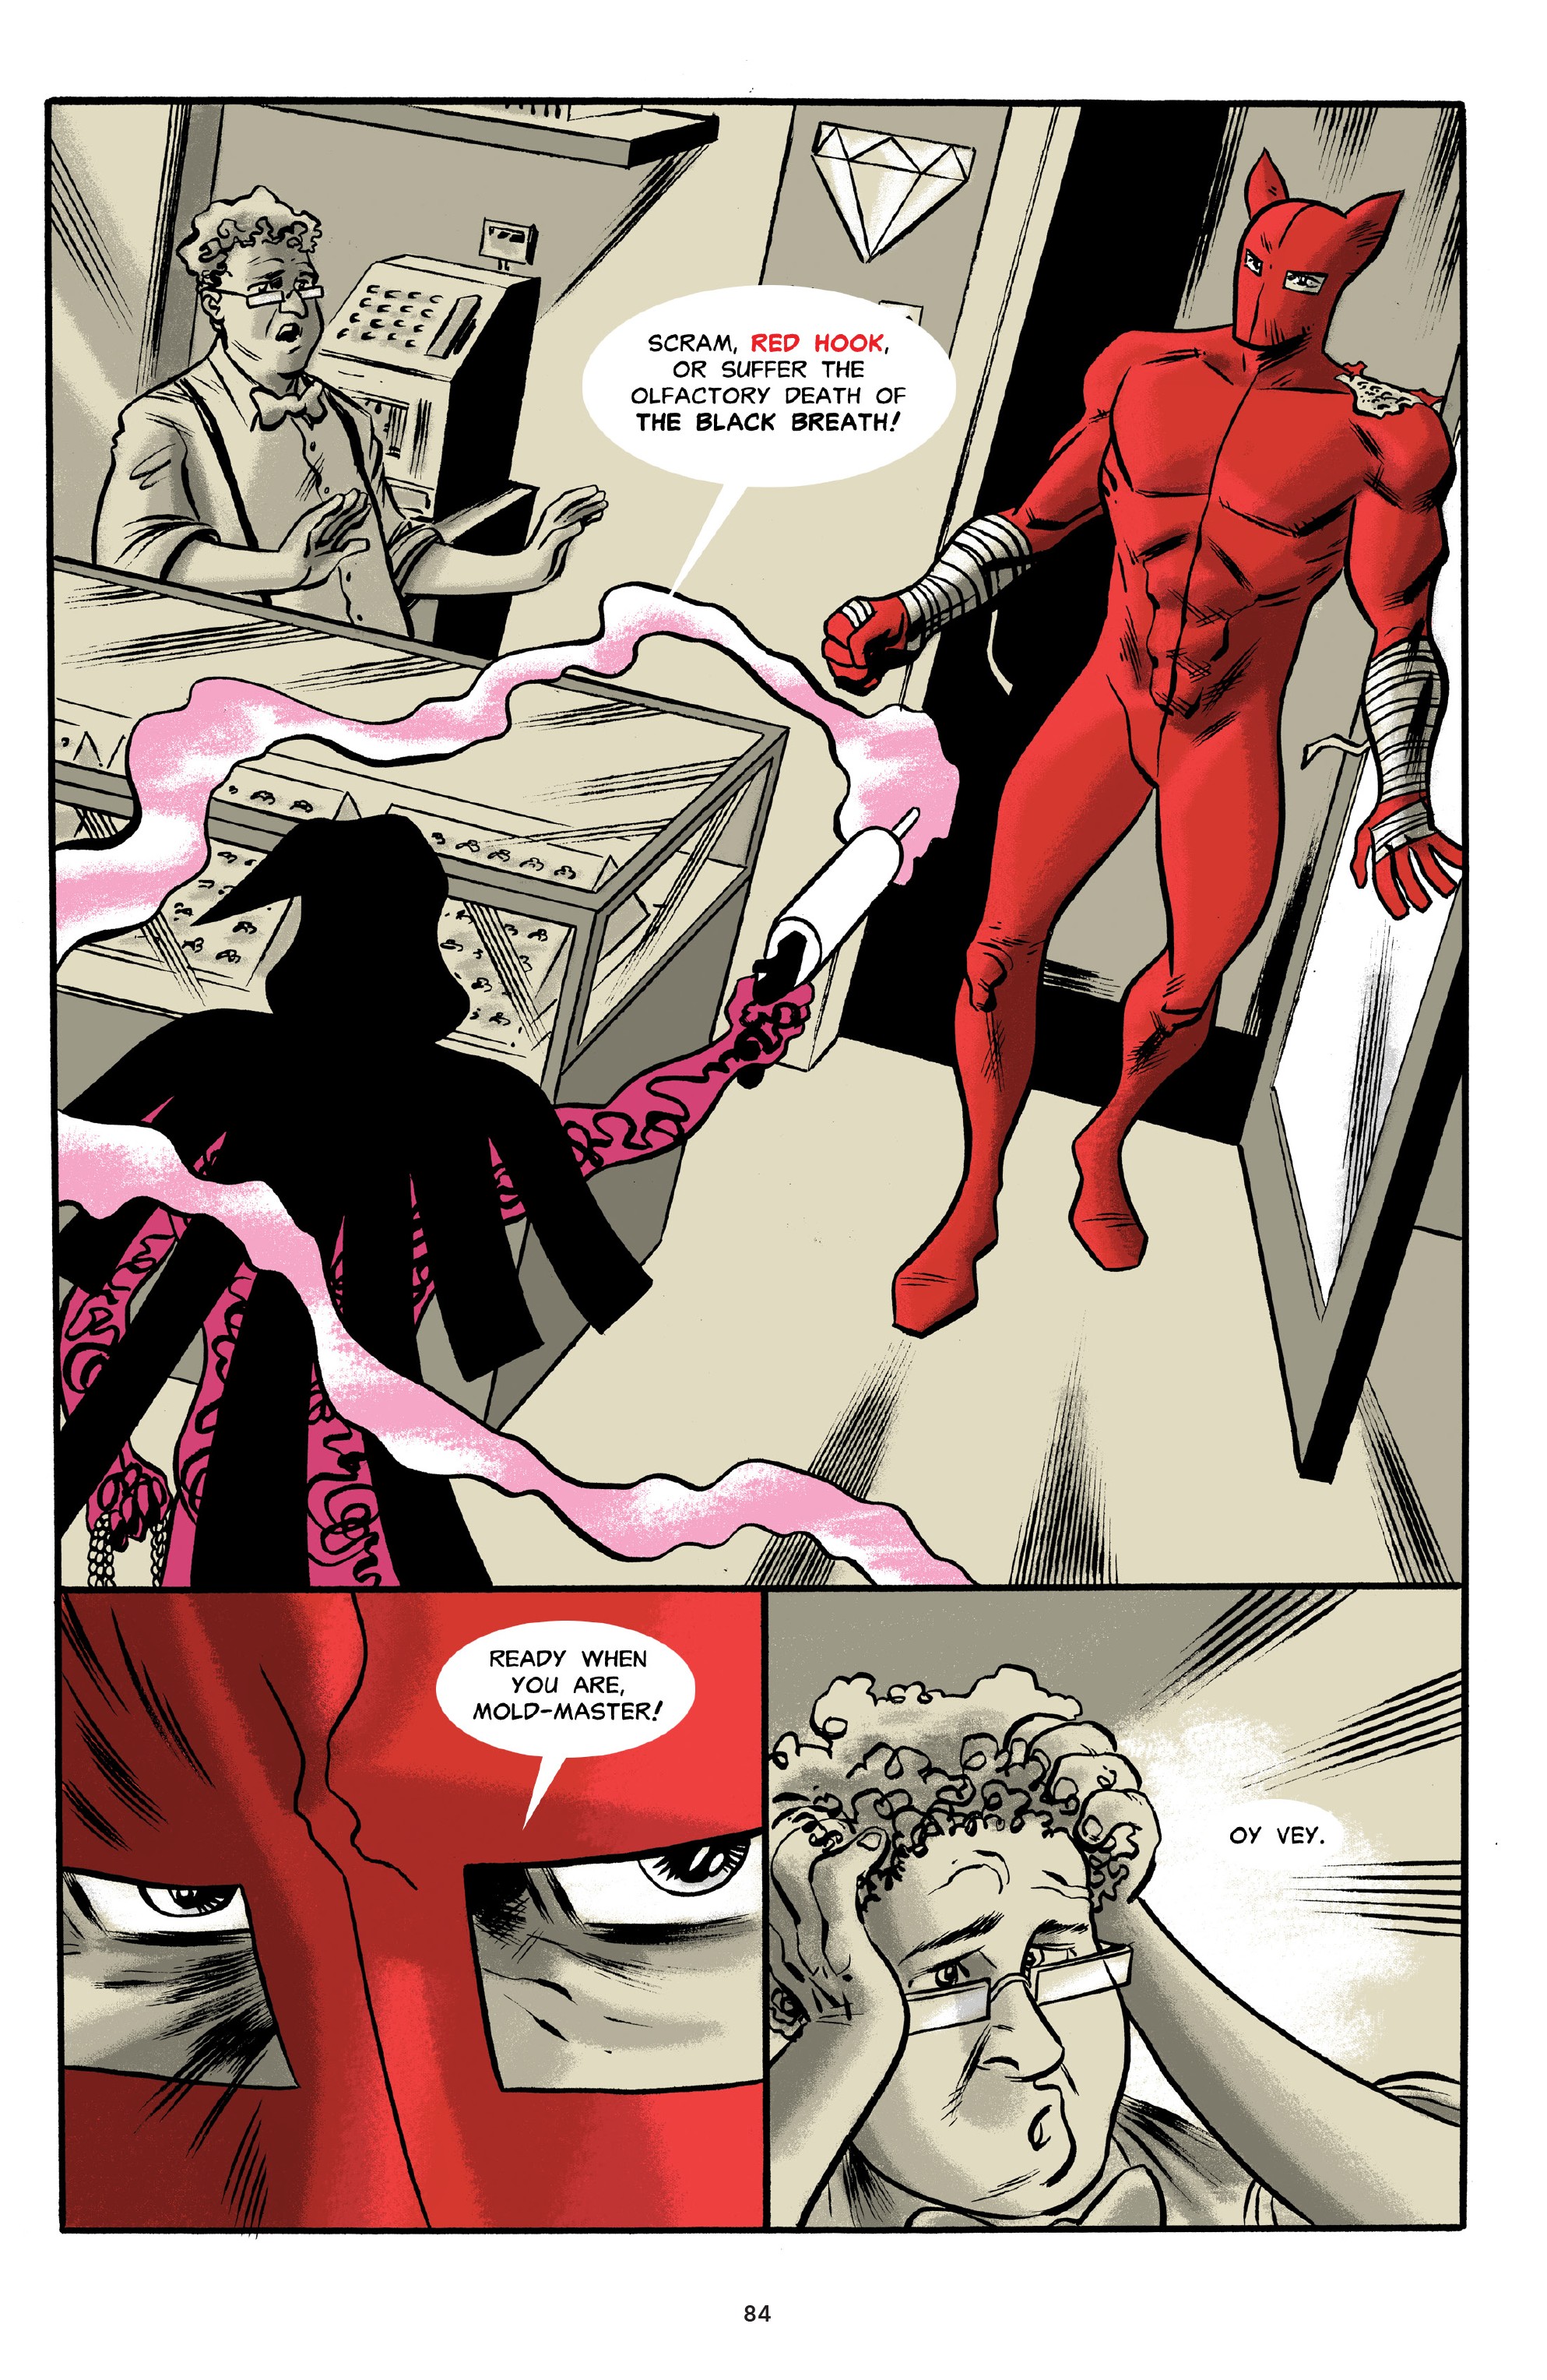 Read online The Red Hook comic -  Issue # TPB (Part 1) - 84